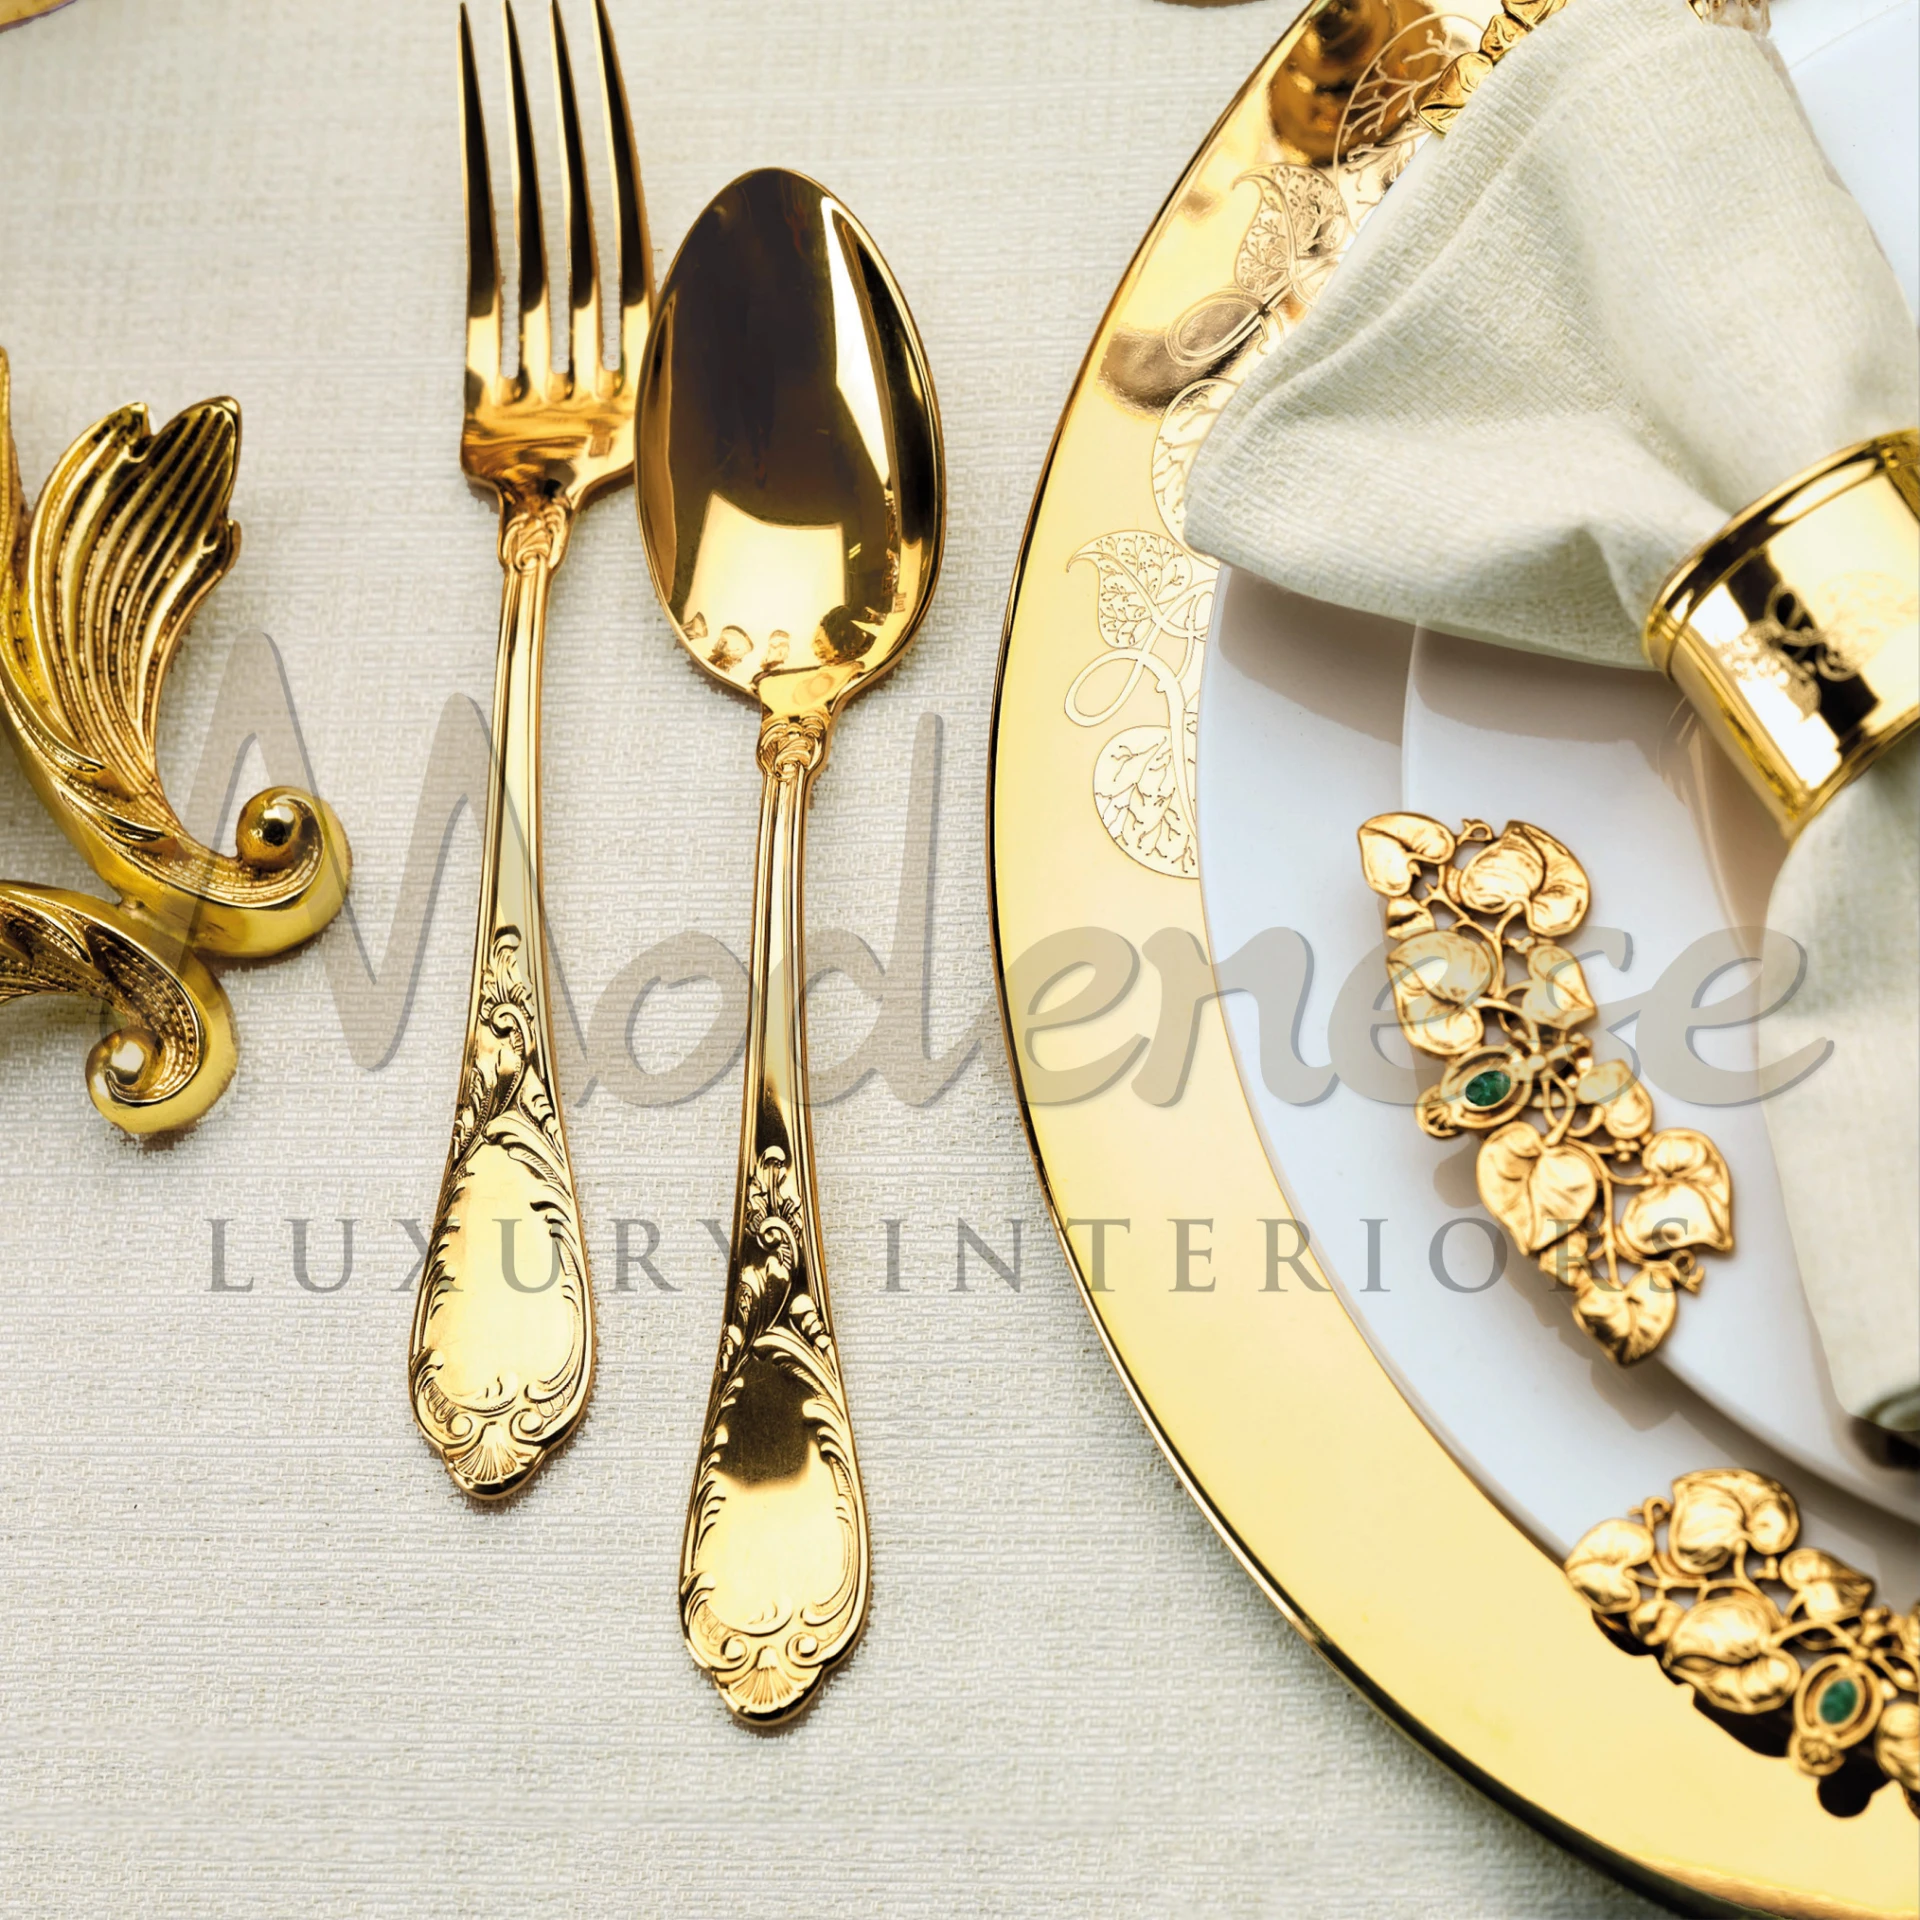 Luxurious gold cutlery and plate with intricate details and a napkin ring set